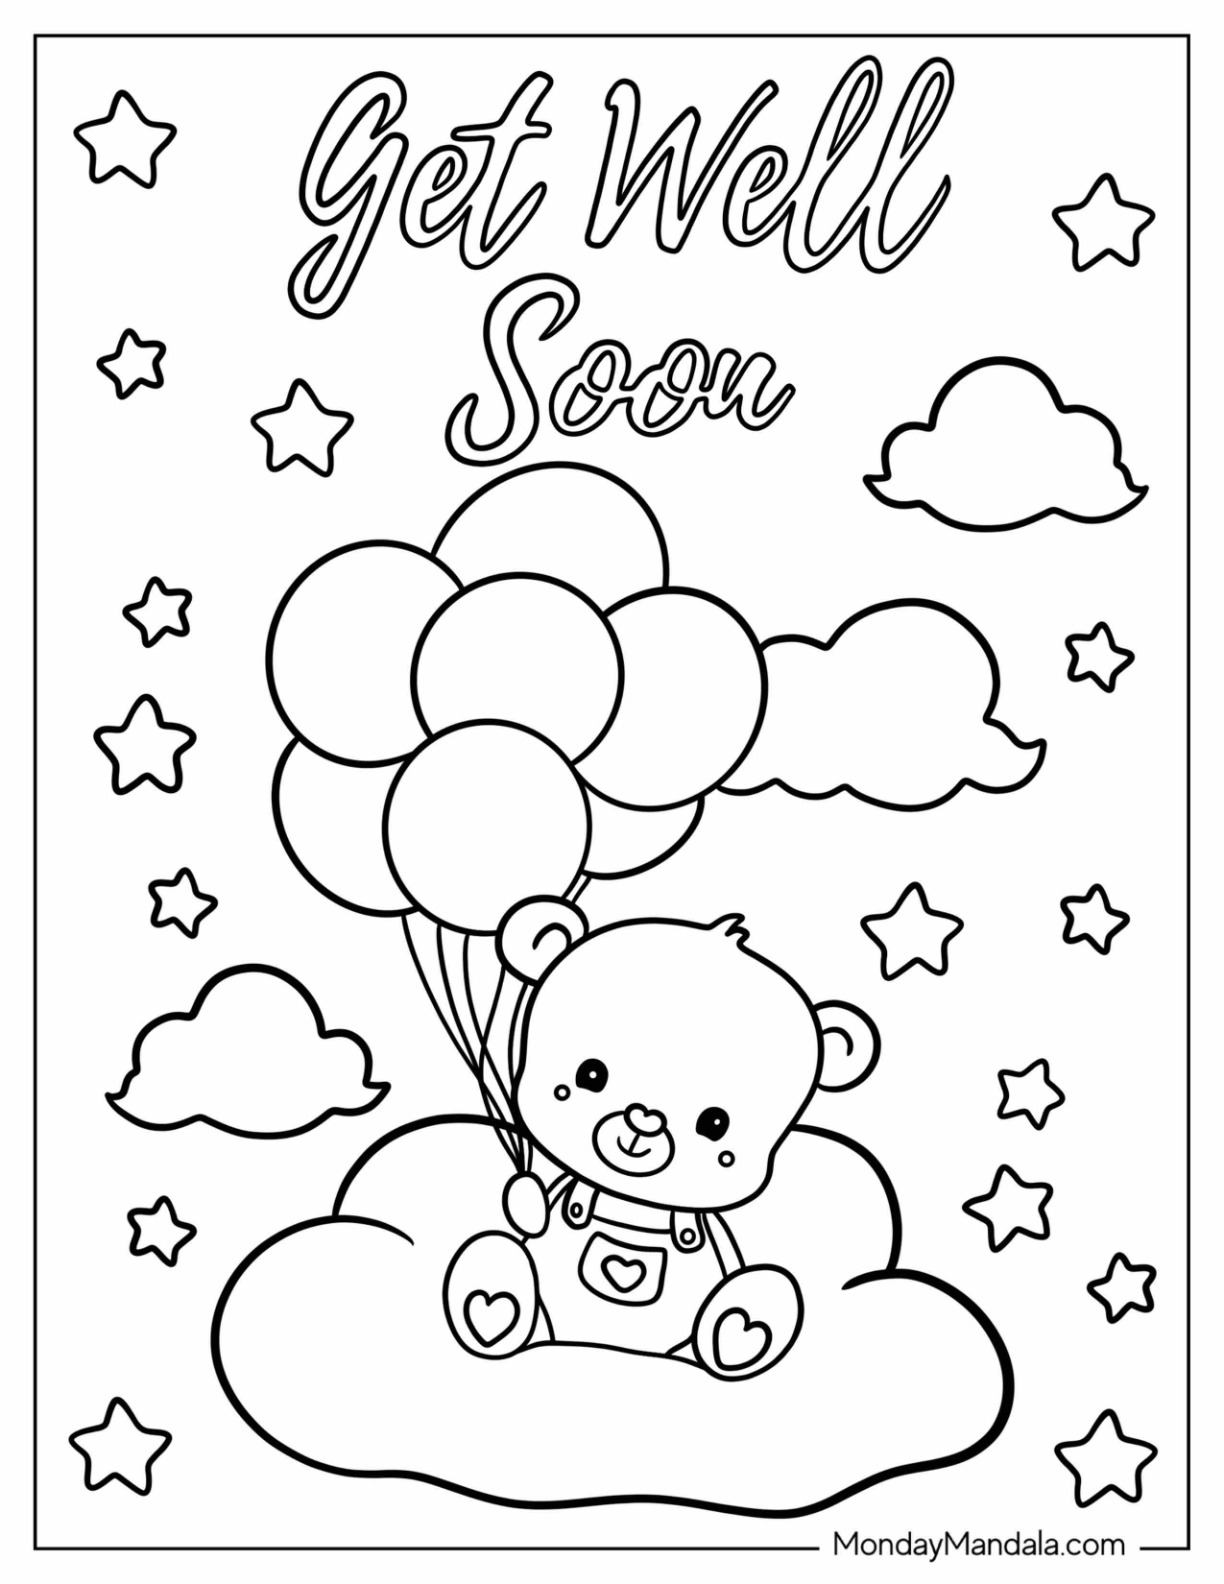 Get well soon coloring pages free pdf printables